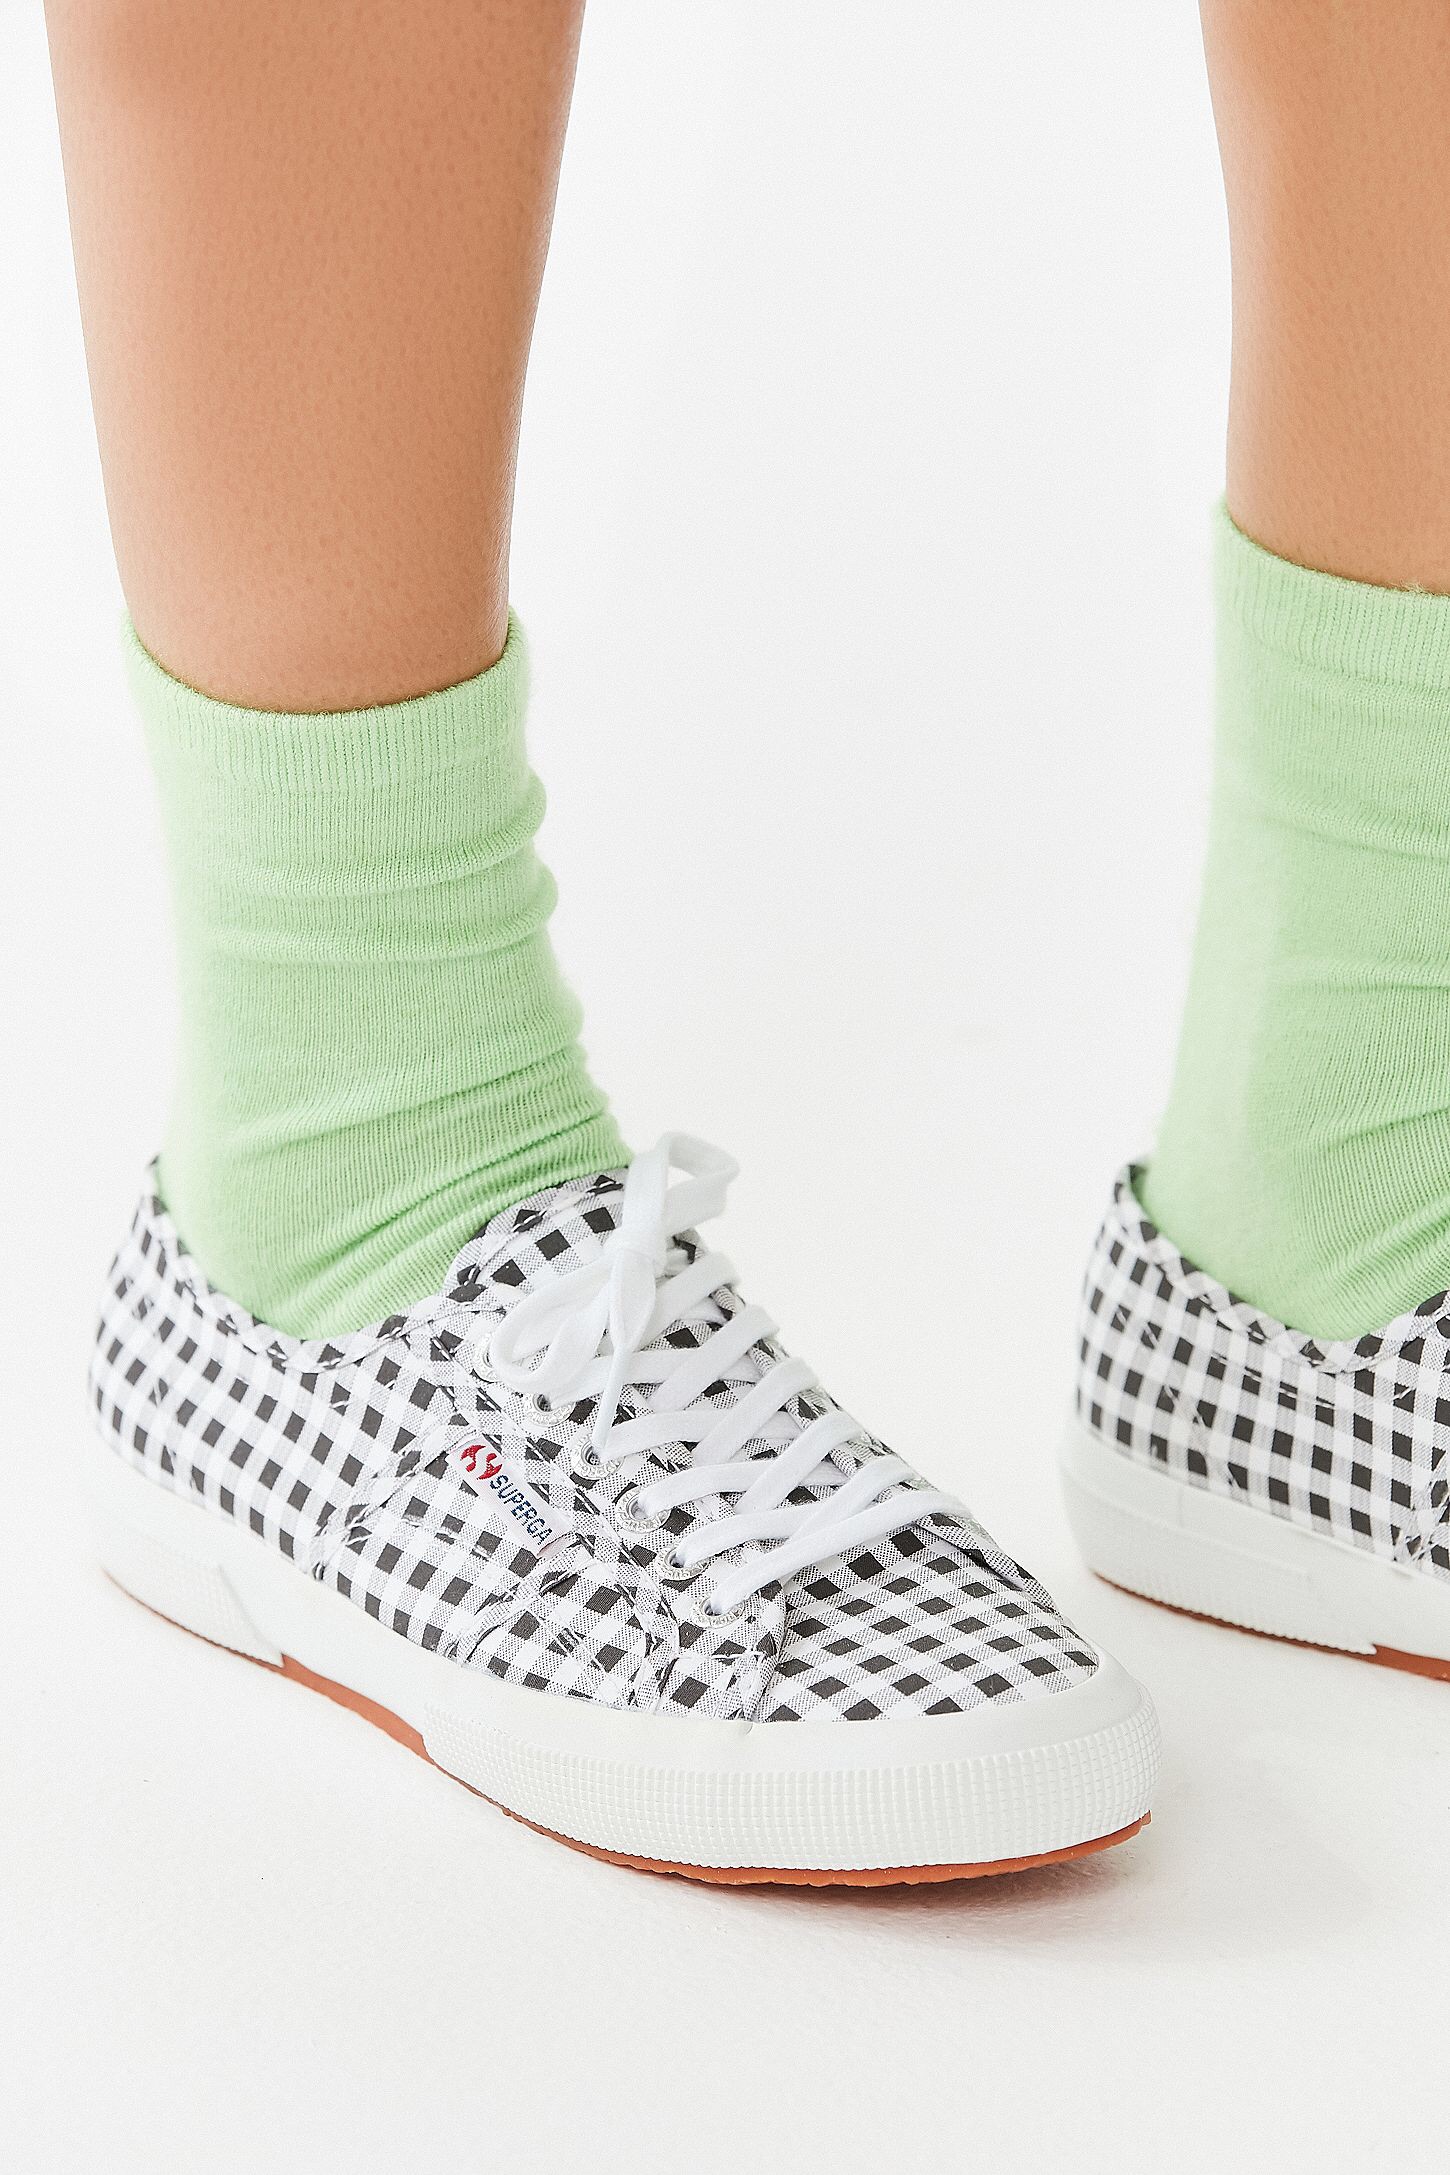 Superga 2750 Gingham Sneaker 女帆布鞋 | Urban Outfitters